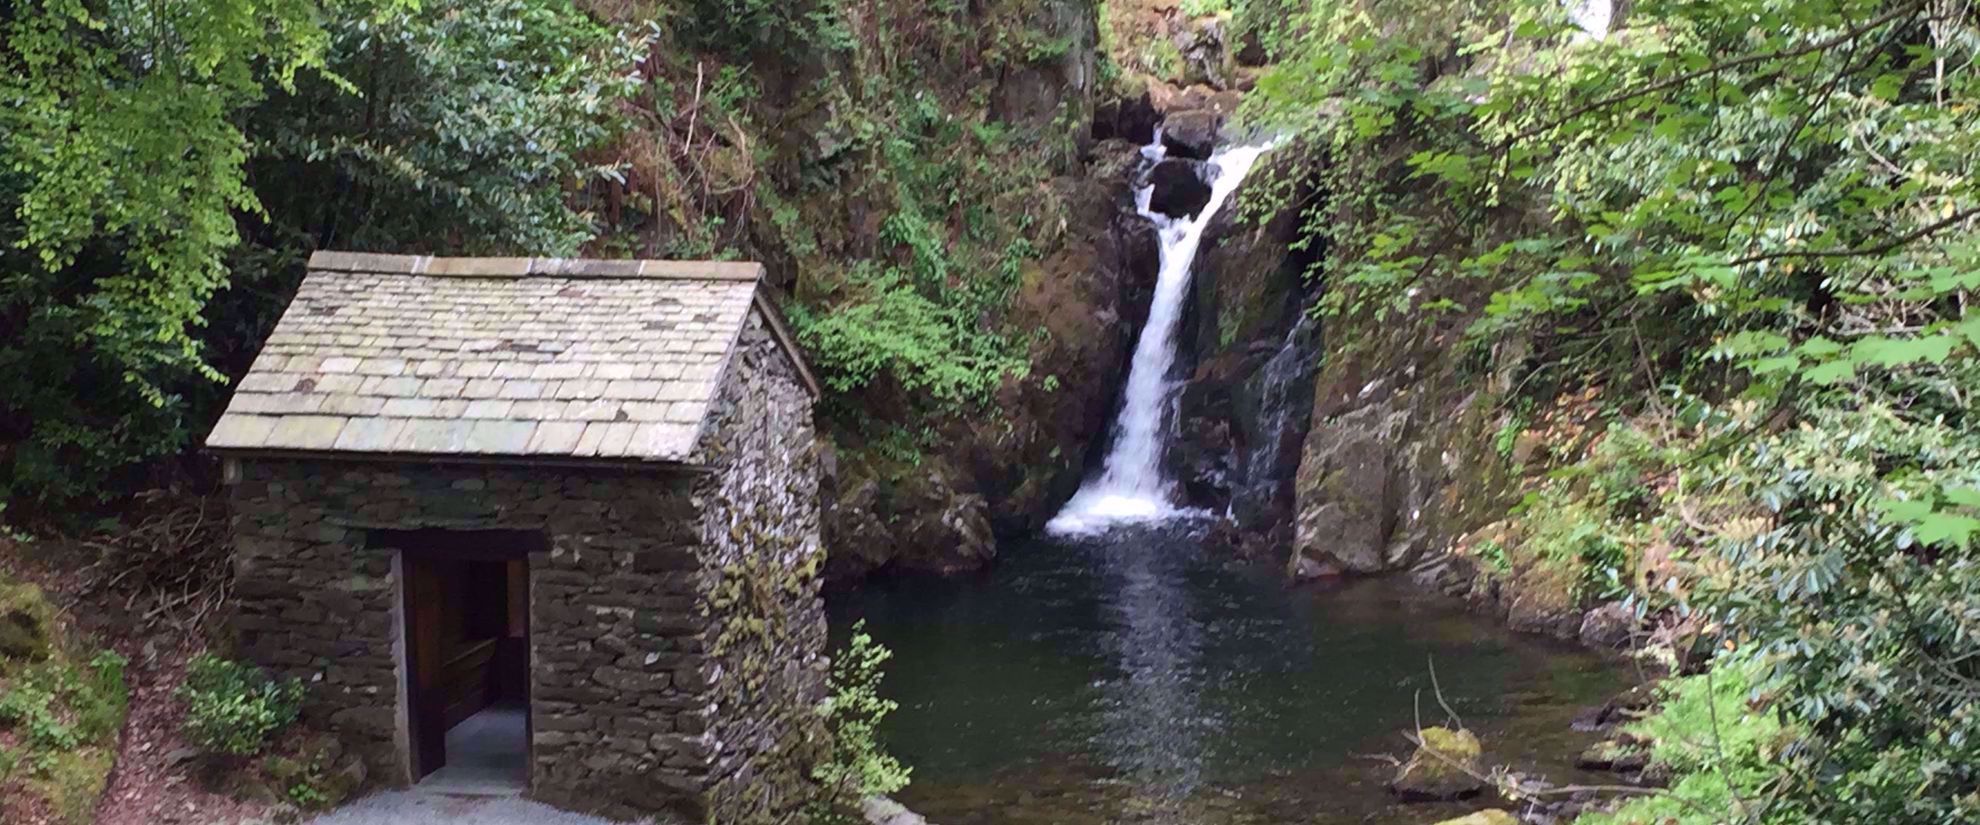 waterfall and abandoned rock building in forest Grasmere uk